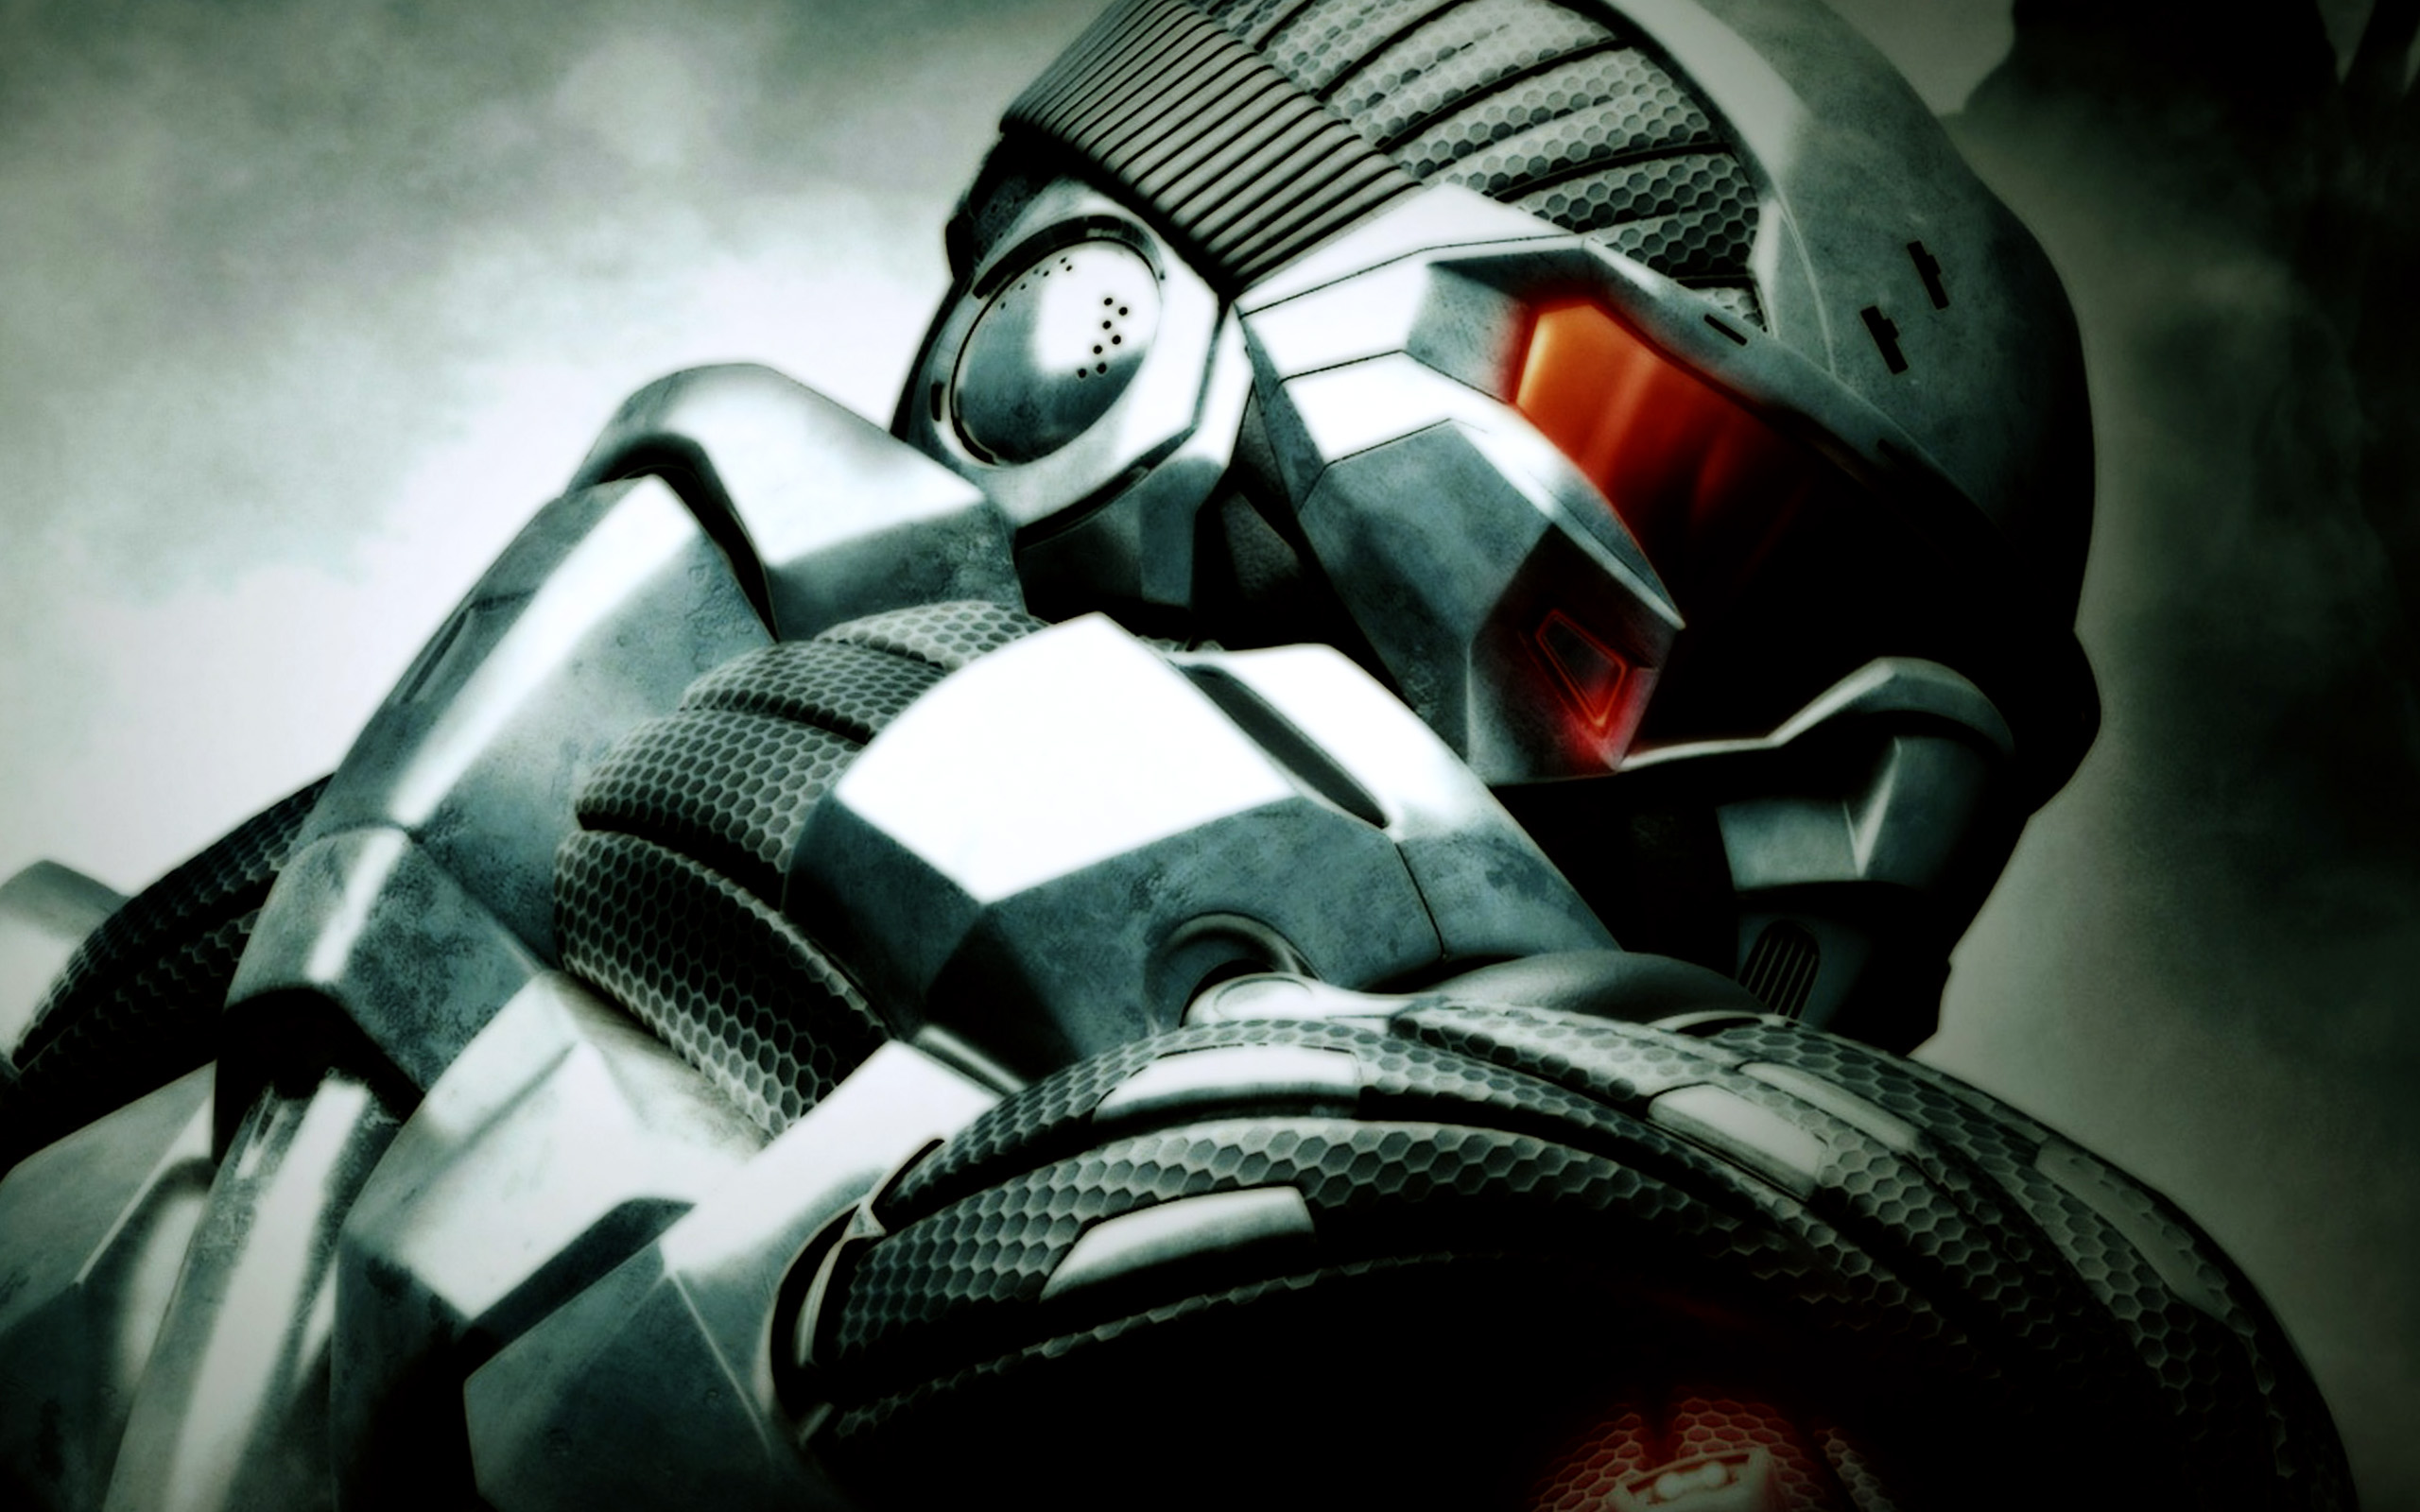 Robot Games Wallpapers High Quality | Download Free